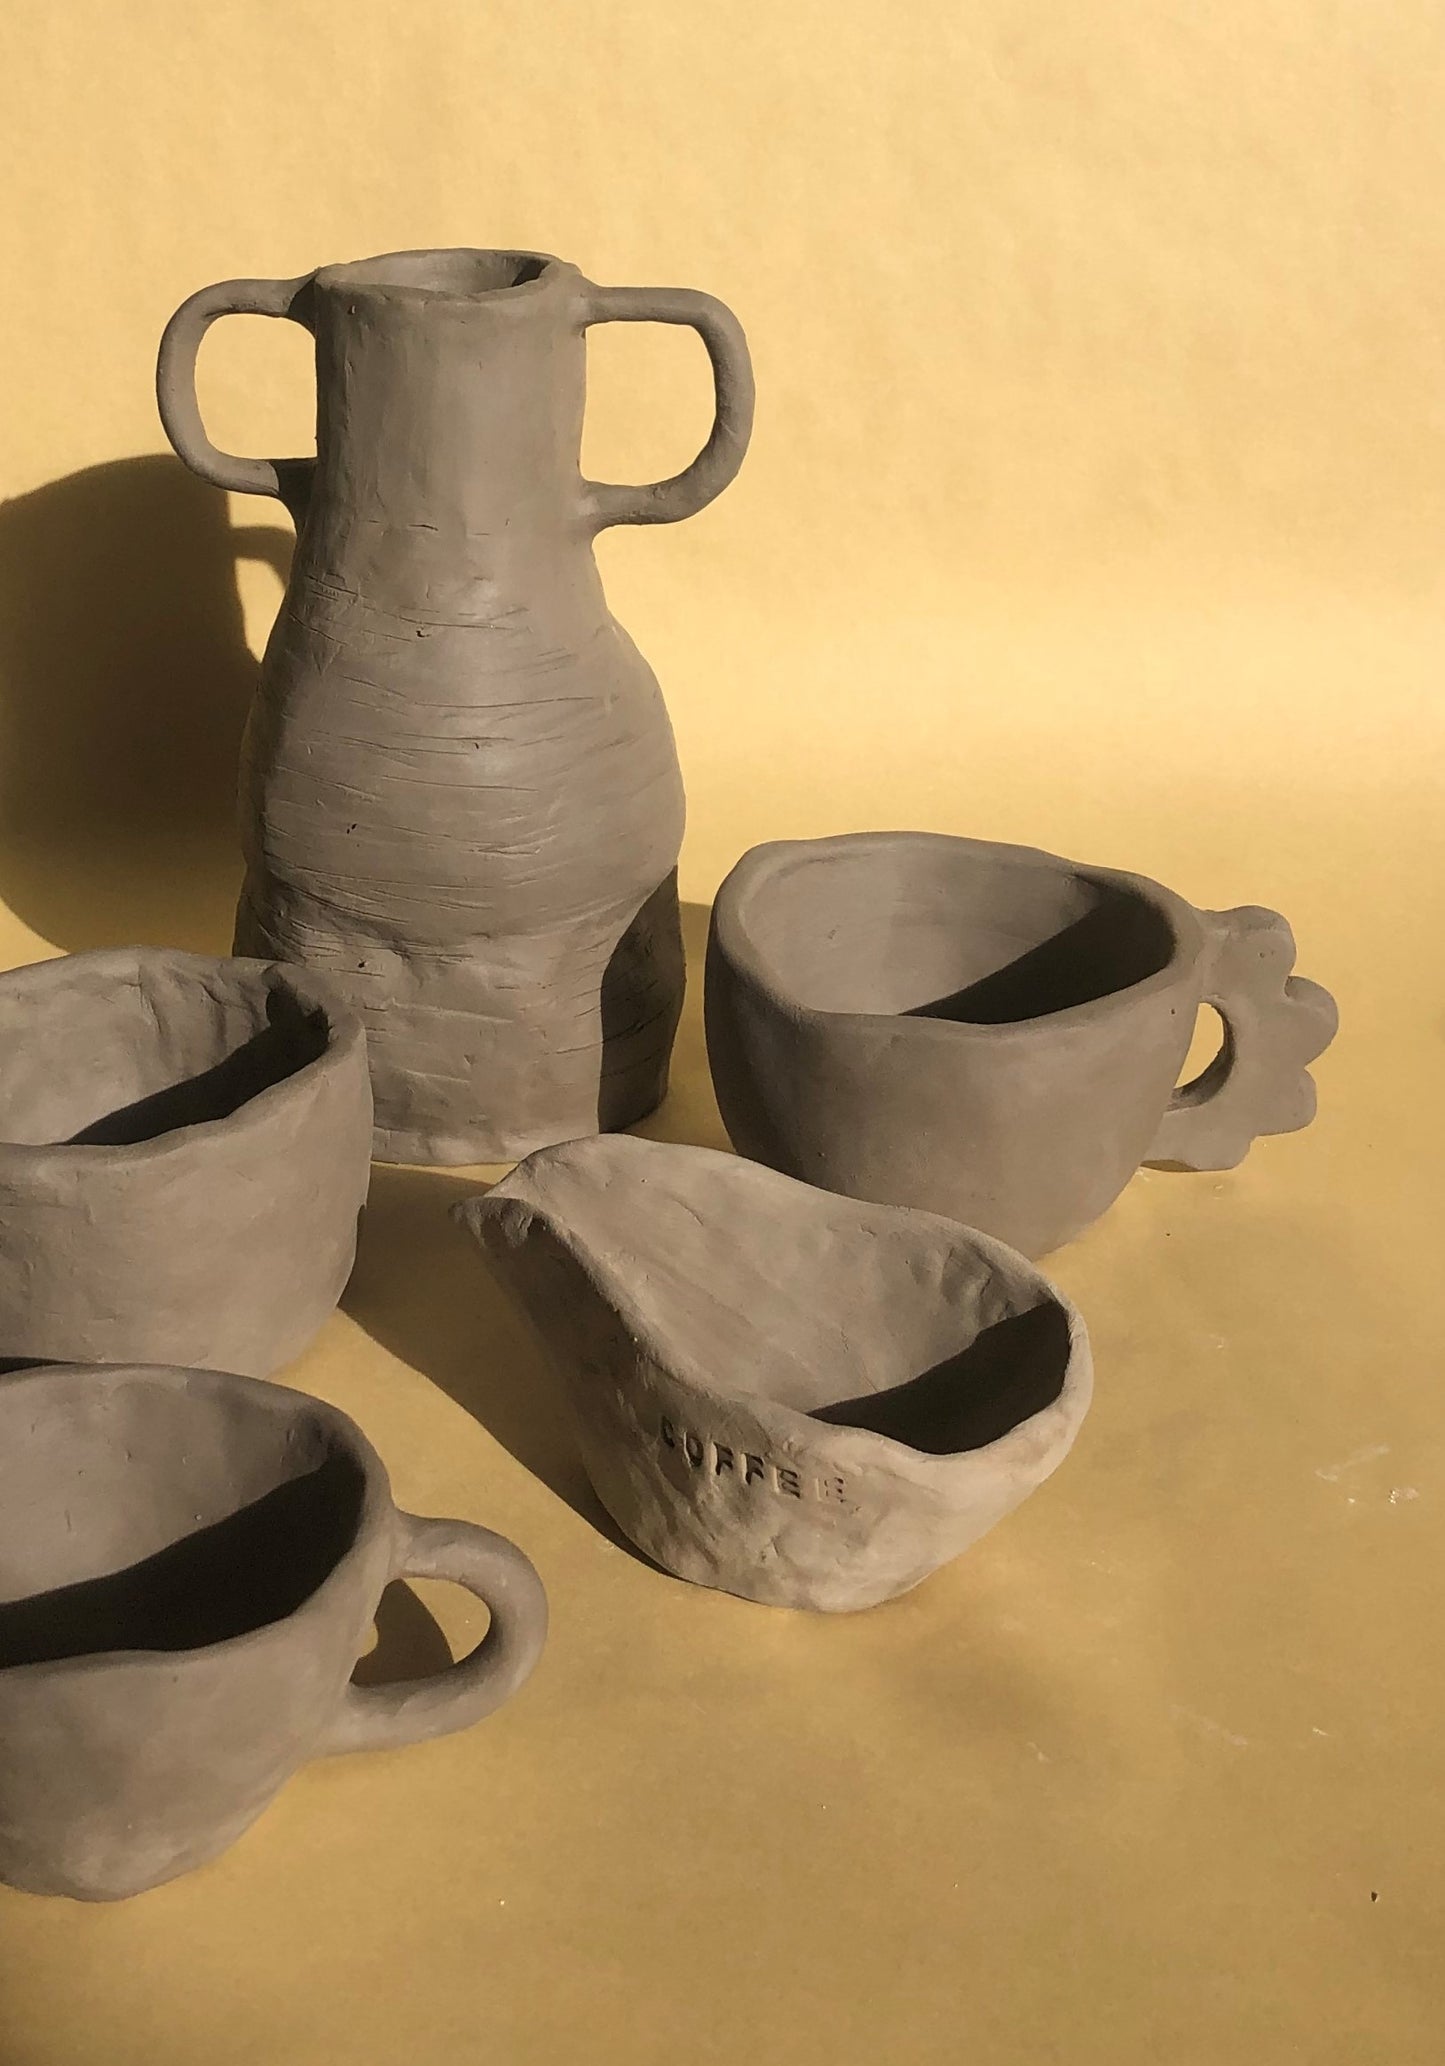 Clay Session Workshop with Margarida in Caldas da Rainha, Portugal by subcultours